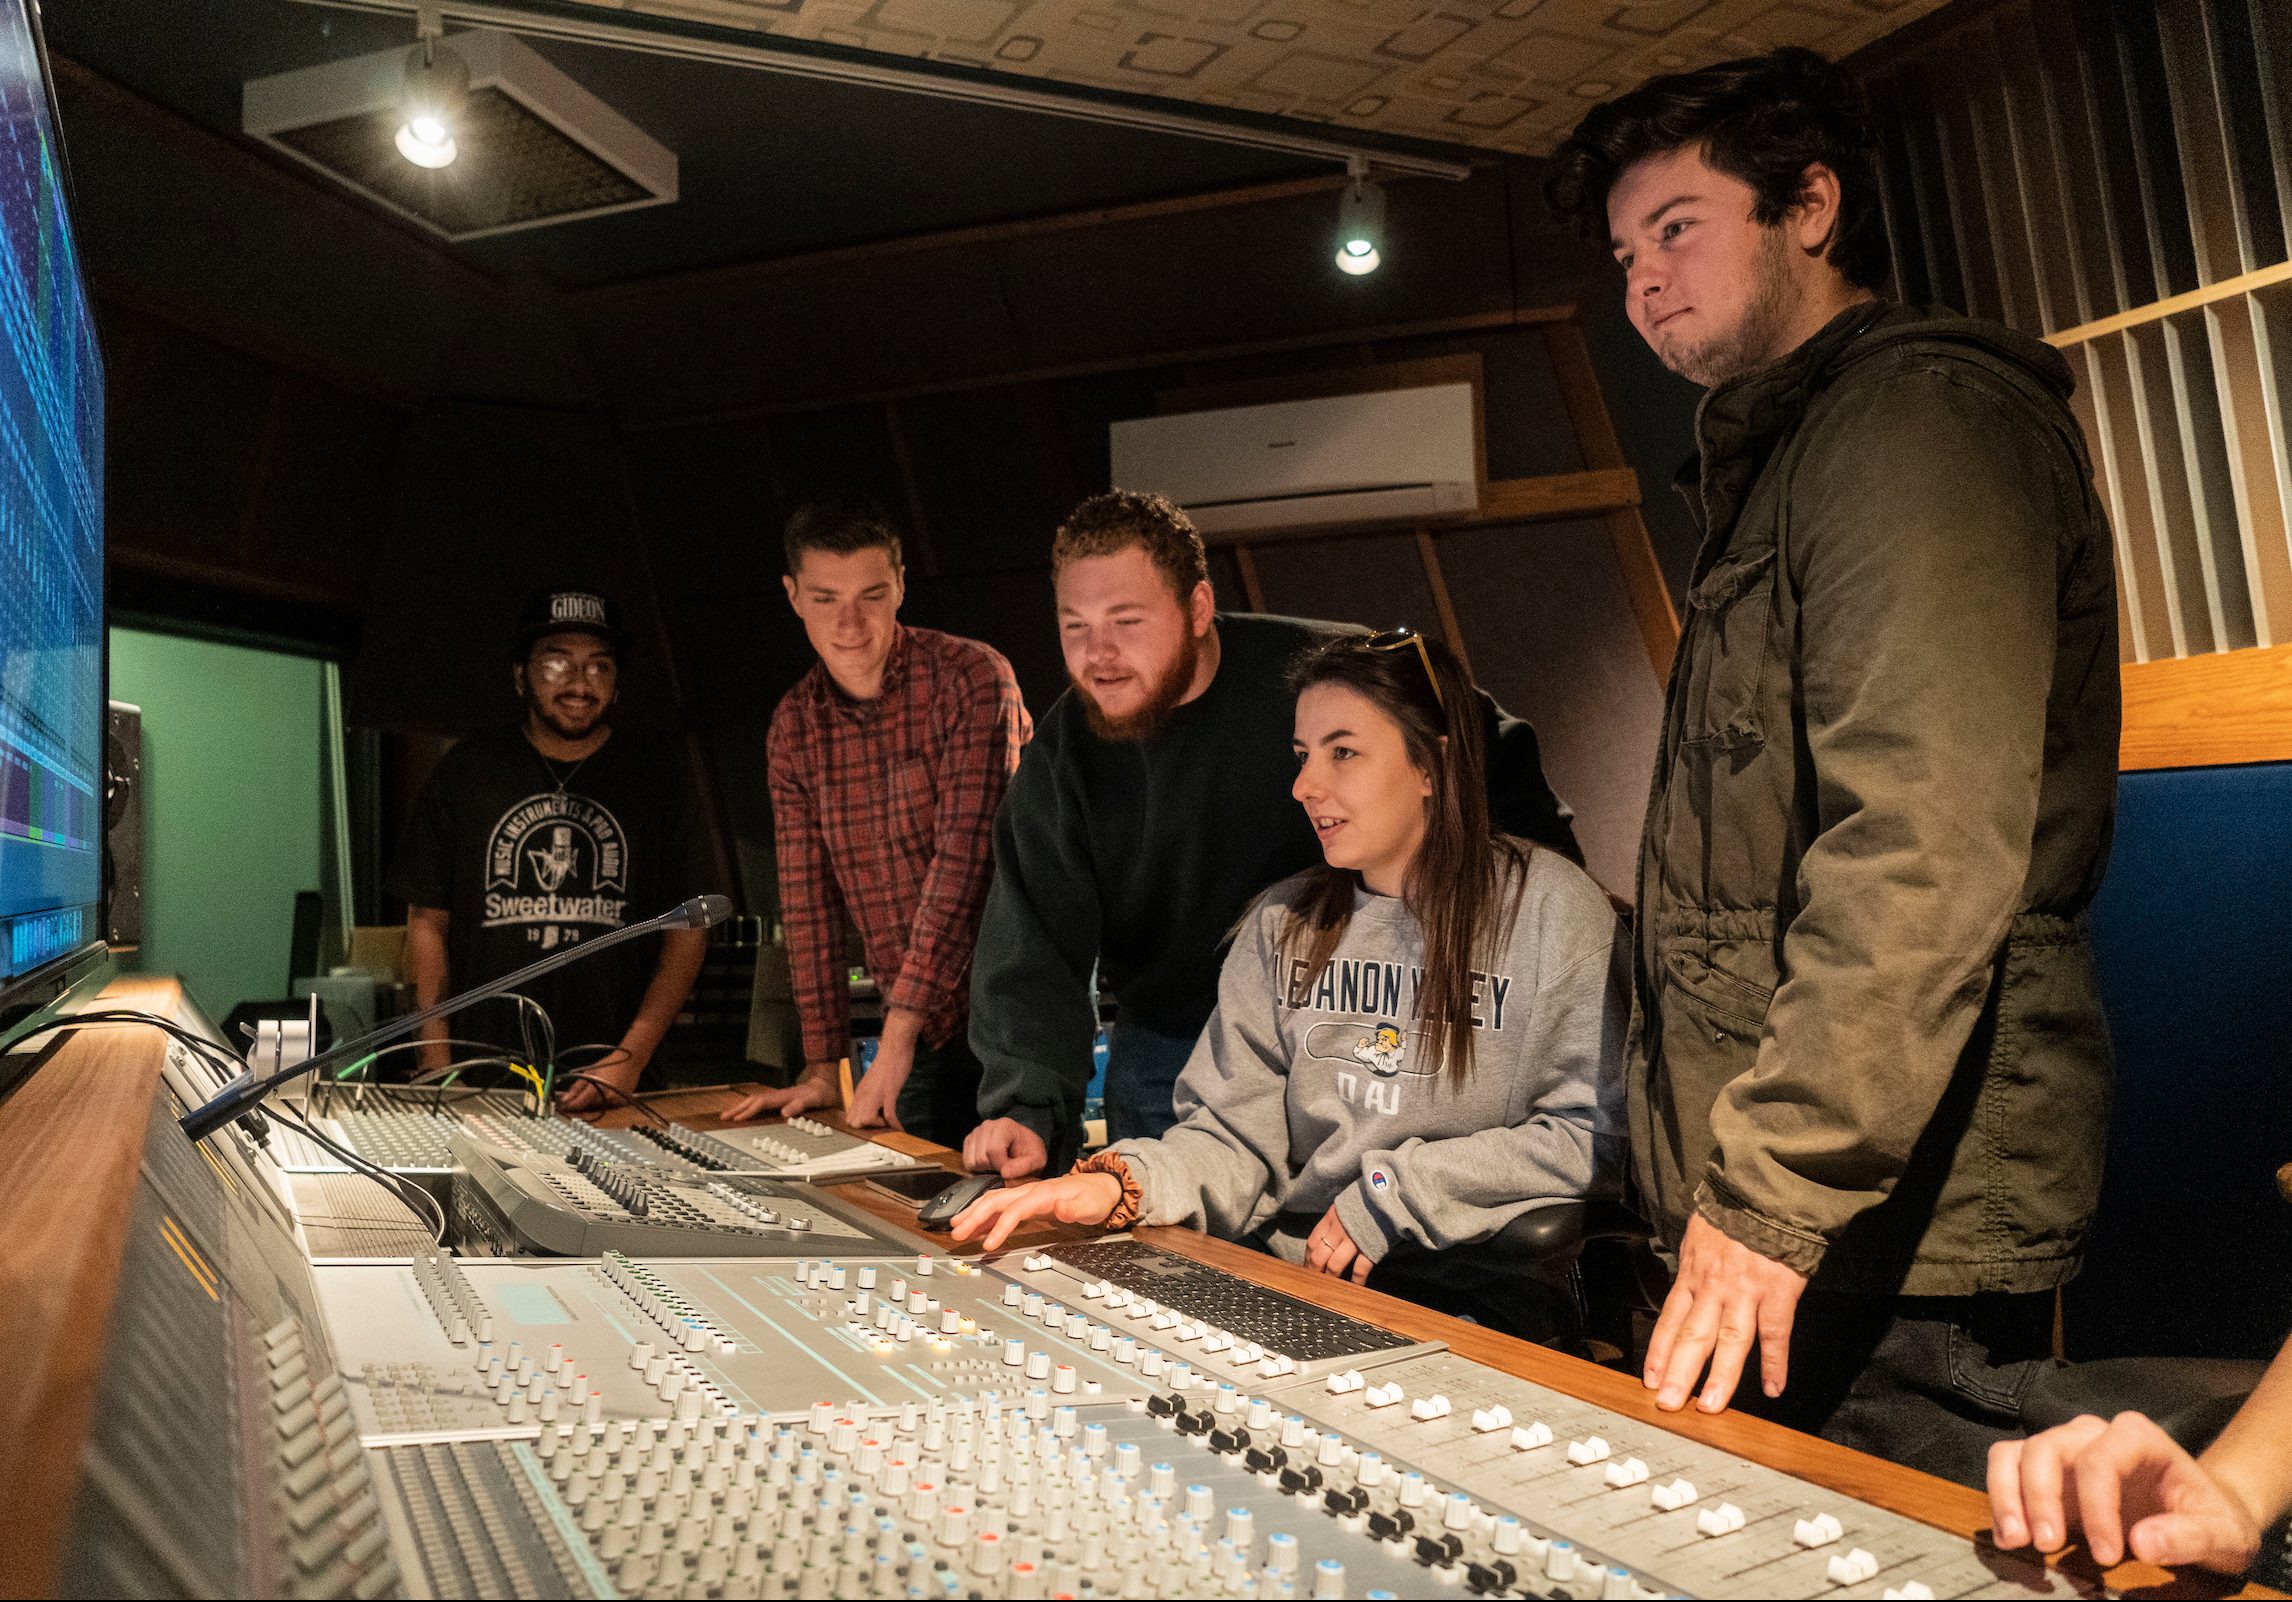 Students work on audio equipment in Studio A